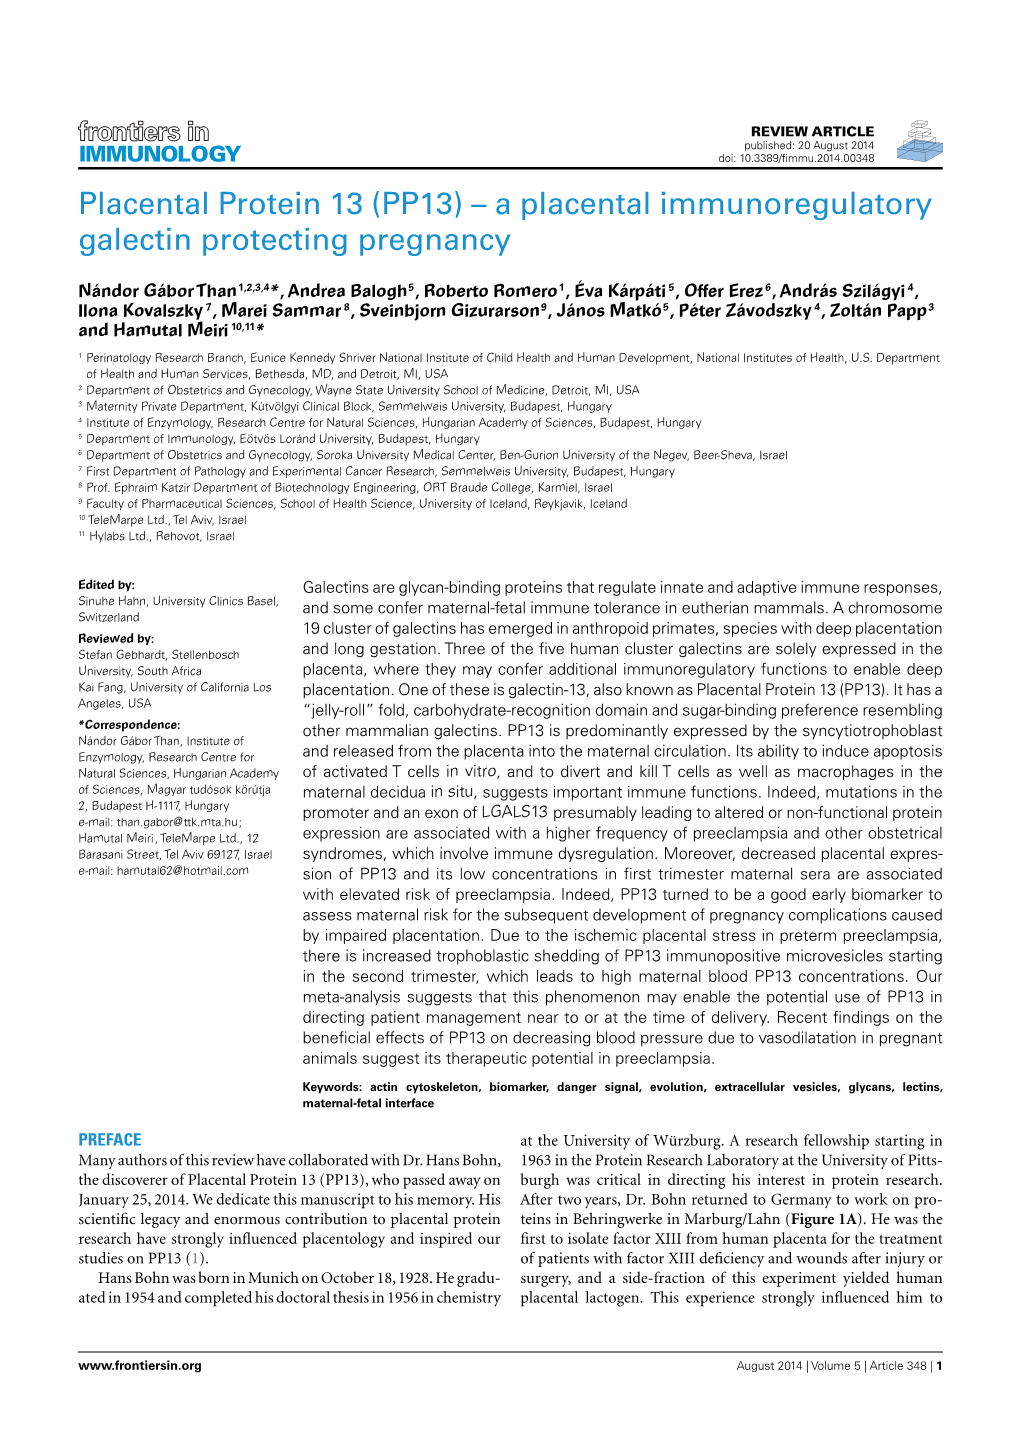 Placental Protein 13 (PP13) – a Placental Immunoregulatory Galectin Protecting Pregnancy